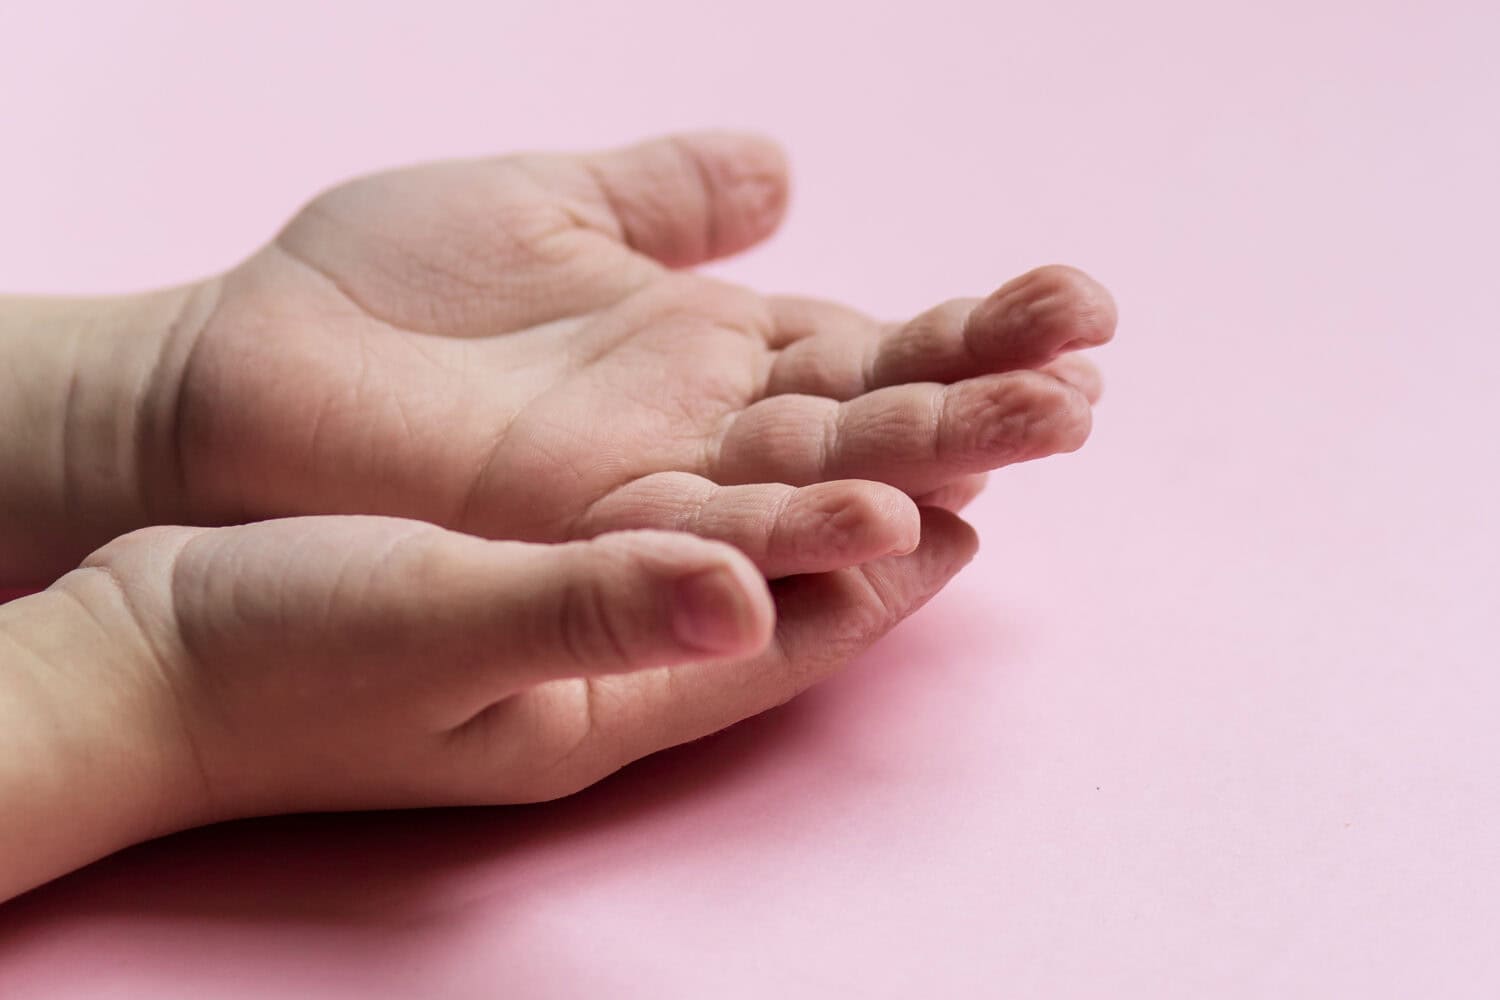 wrinkled skin on the fingers after water. Bathing in the bathroom. Long wet. Baby fingers on hand. pink background